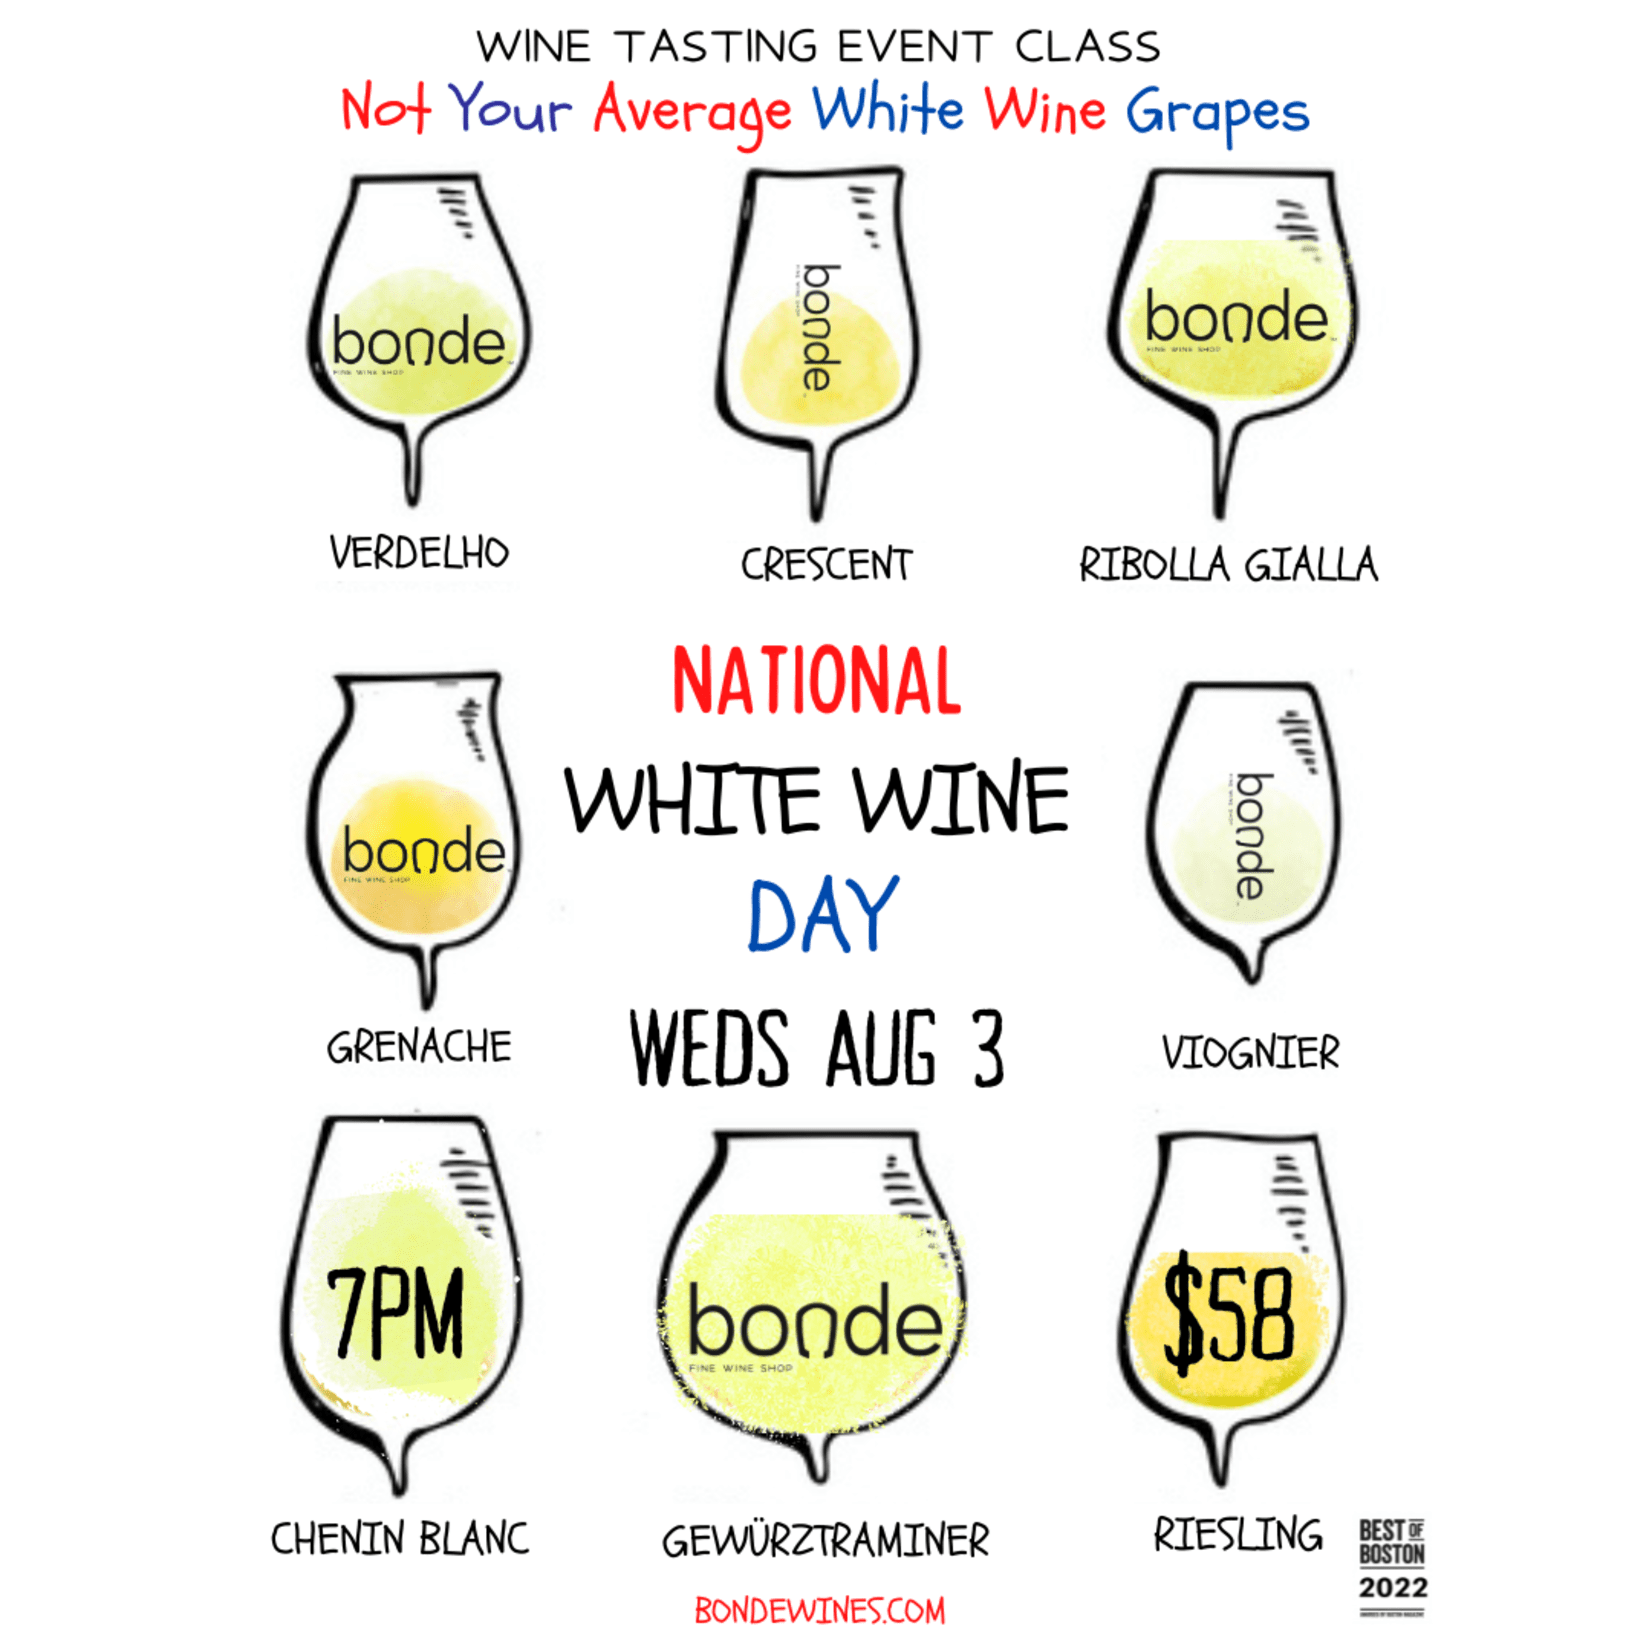 Wine Tasting - White Wine Day: Not Your Average Grapes - Wednesday, August 3 - 7:00 p.m.